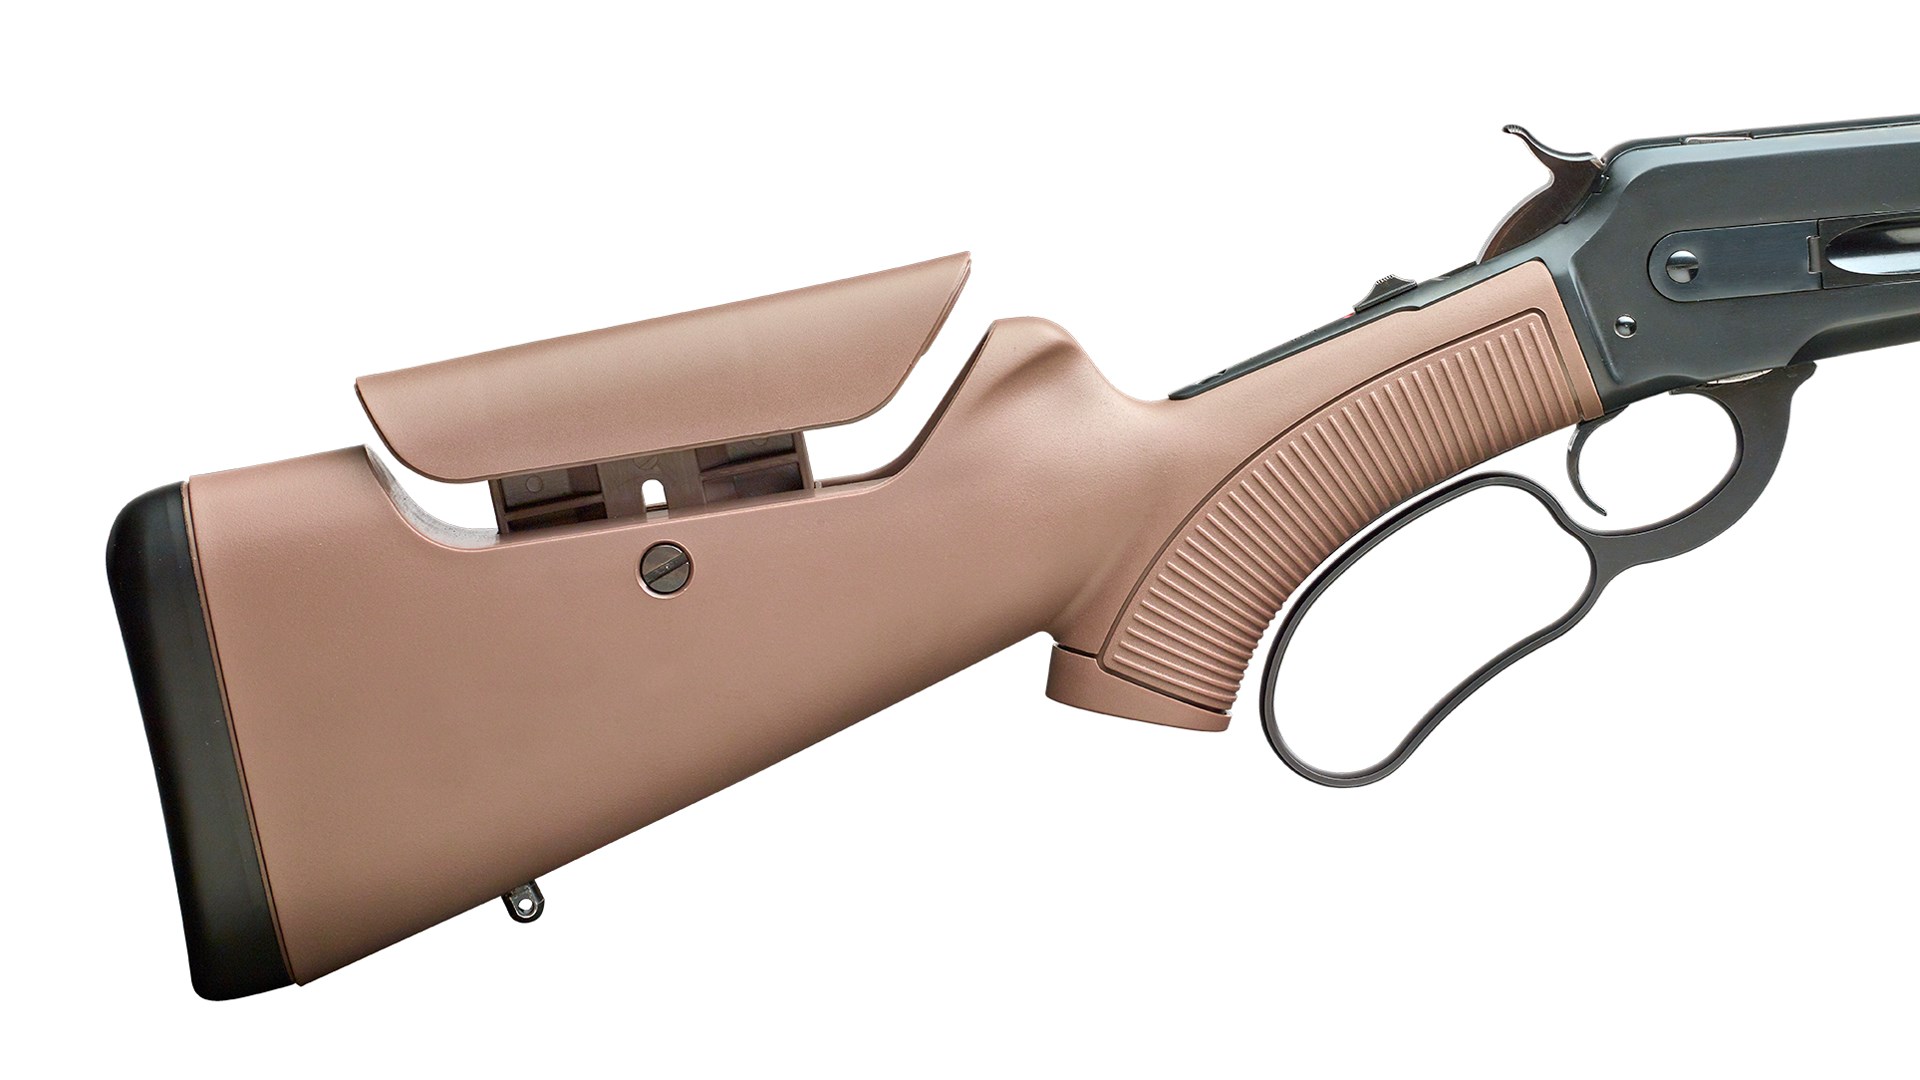 The adjustable comb of the Pedersoli Model 86/71 Droptine lever-action rifle.